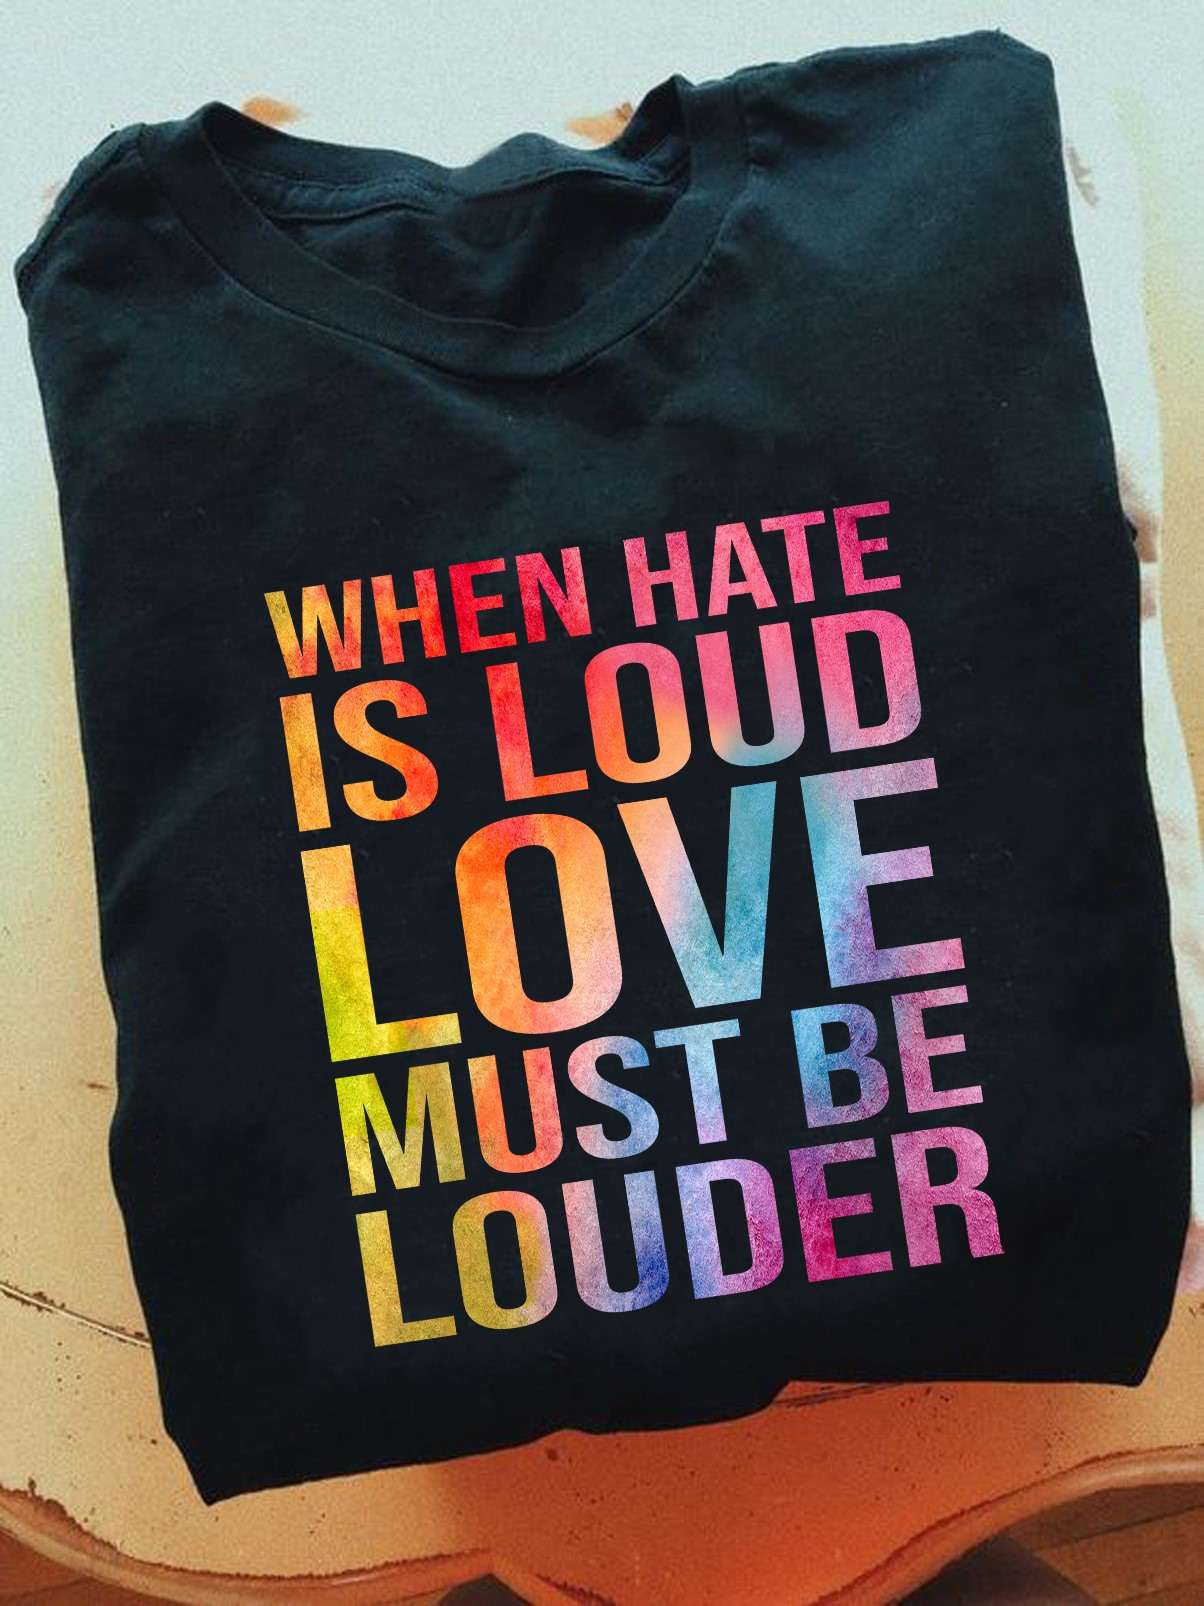 When hate is loud, love must be louder - Hate and love